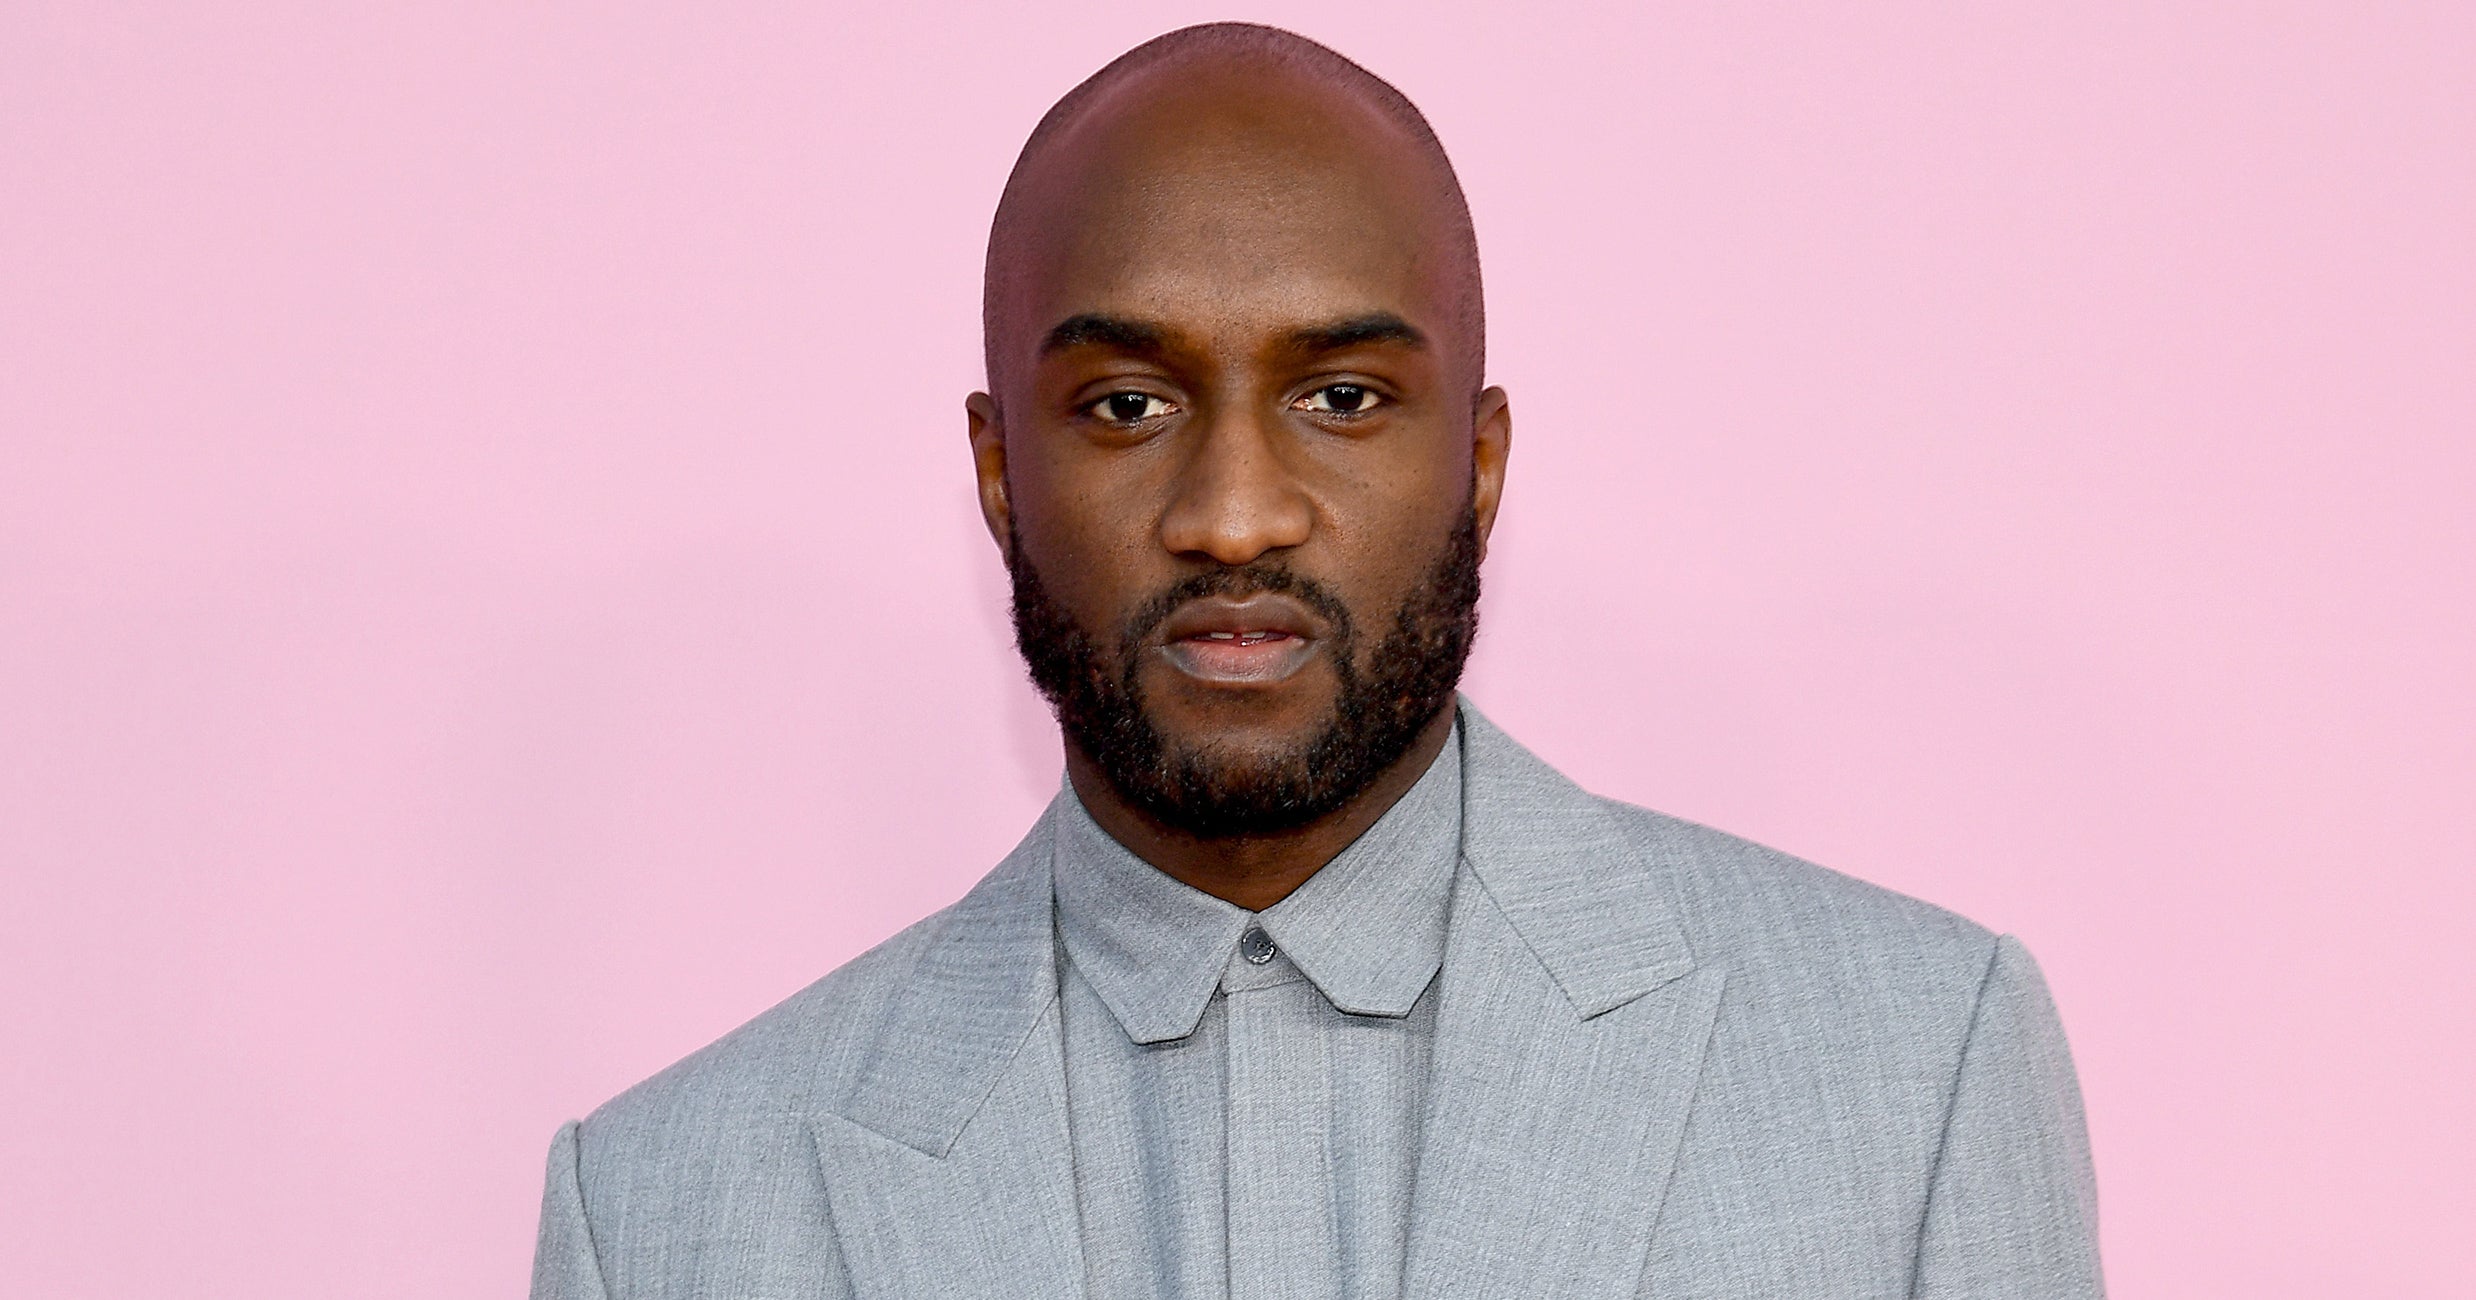 Wrath of Twitter heaped upon designer Virgil Abloh for $50 donation to bail  fund – New York Daily News